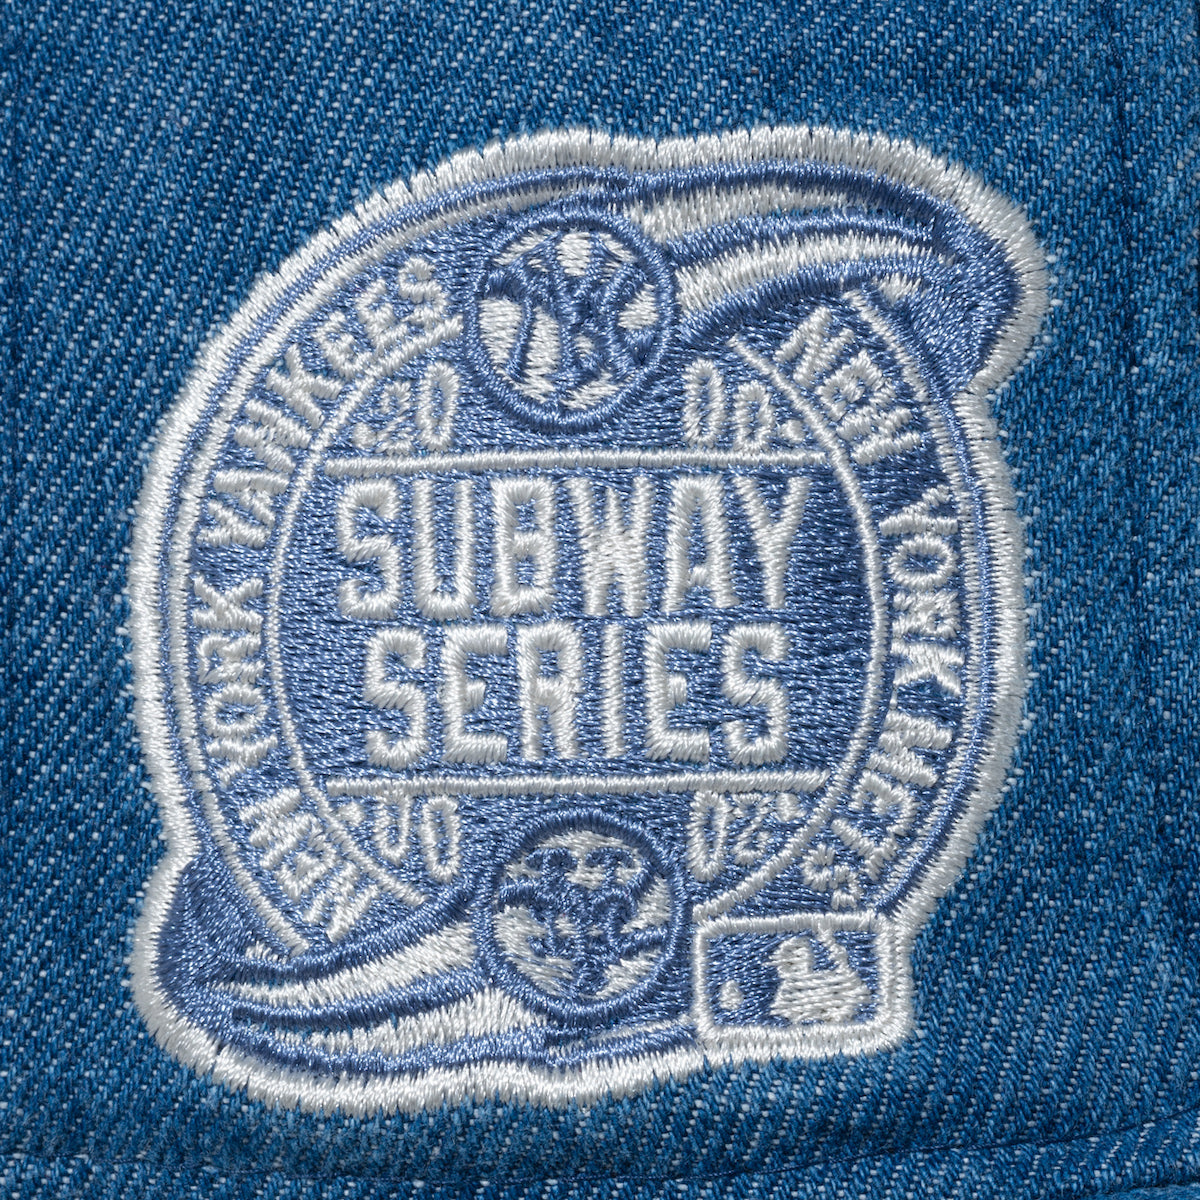 NEW YORK METS SUBWAY SERIES SIDE PATCH DENIM 59FIFTY